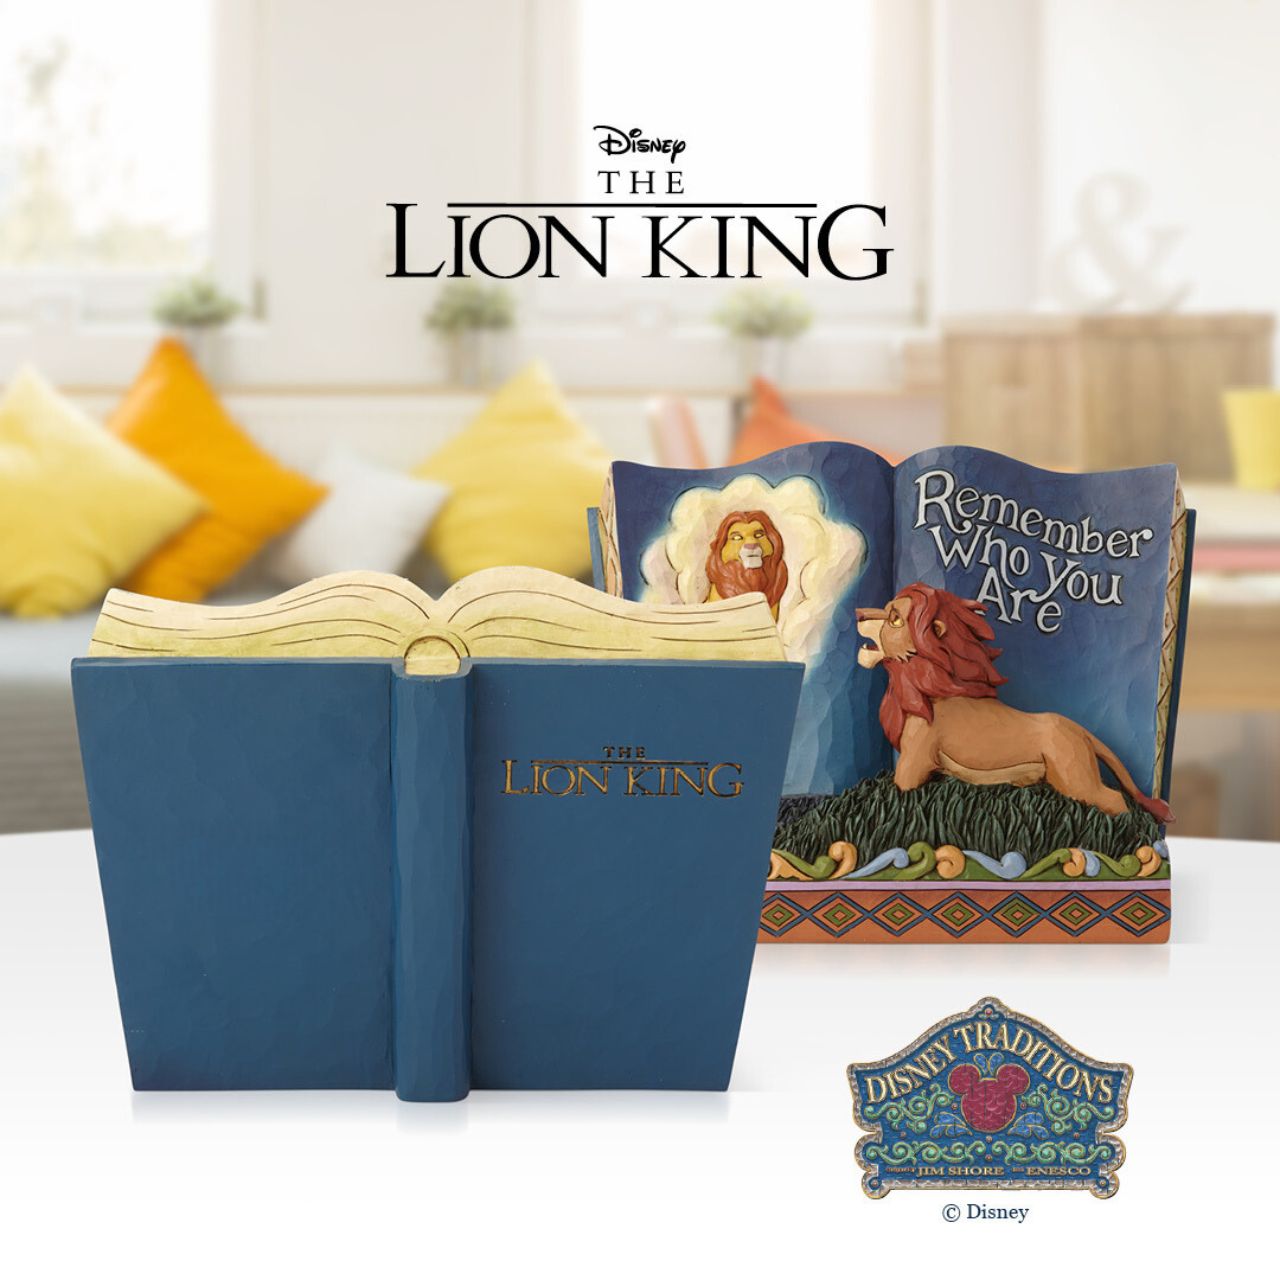 Jim Shore The Lion King Remember Who You Are  Before he lost his father, Simba couldn't wait to be king. After Simba runs away, Mufasa's spirit encourages his son to reclaim his rightful throne. Mufasa will remind you to stay true to yourself with this stunning Lion King storybook designed by Jim Shore.